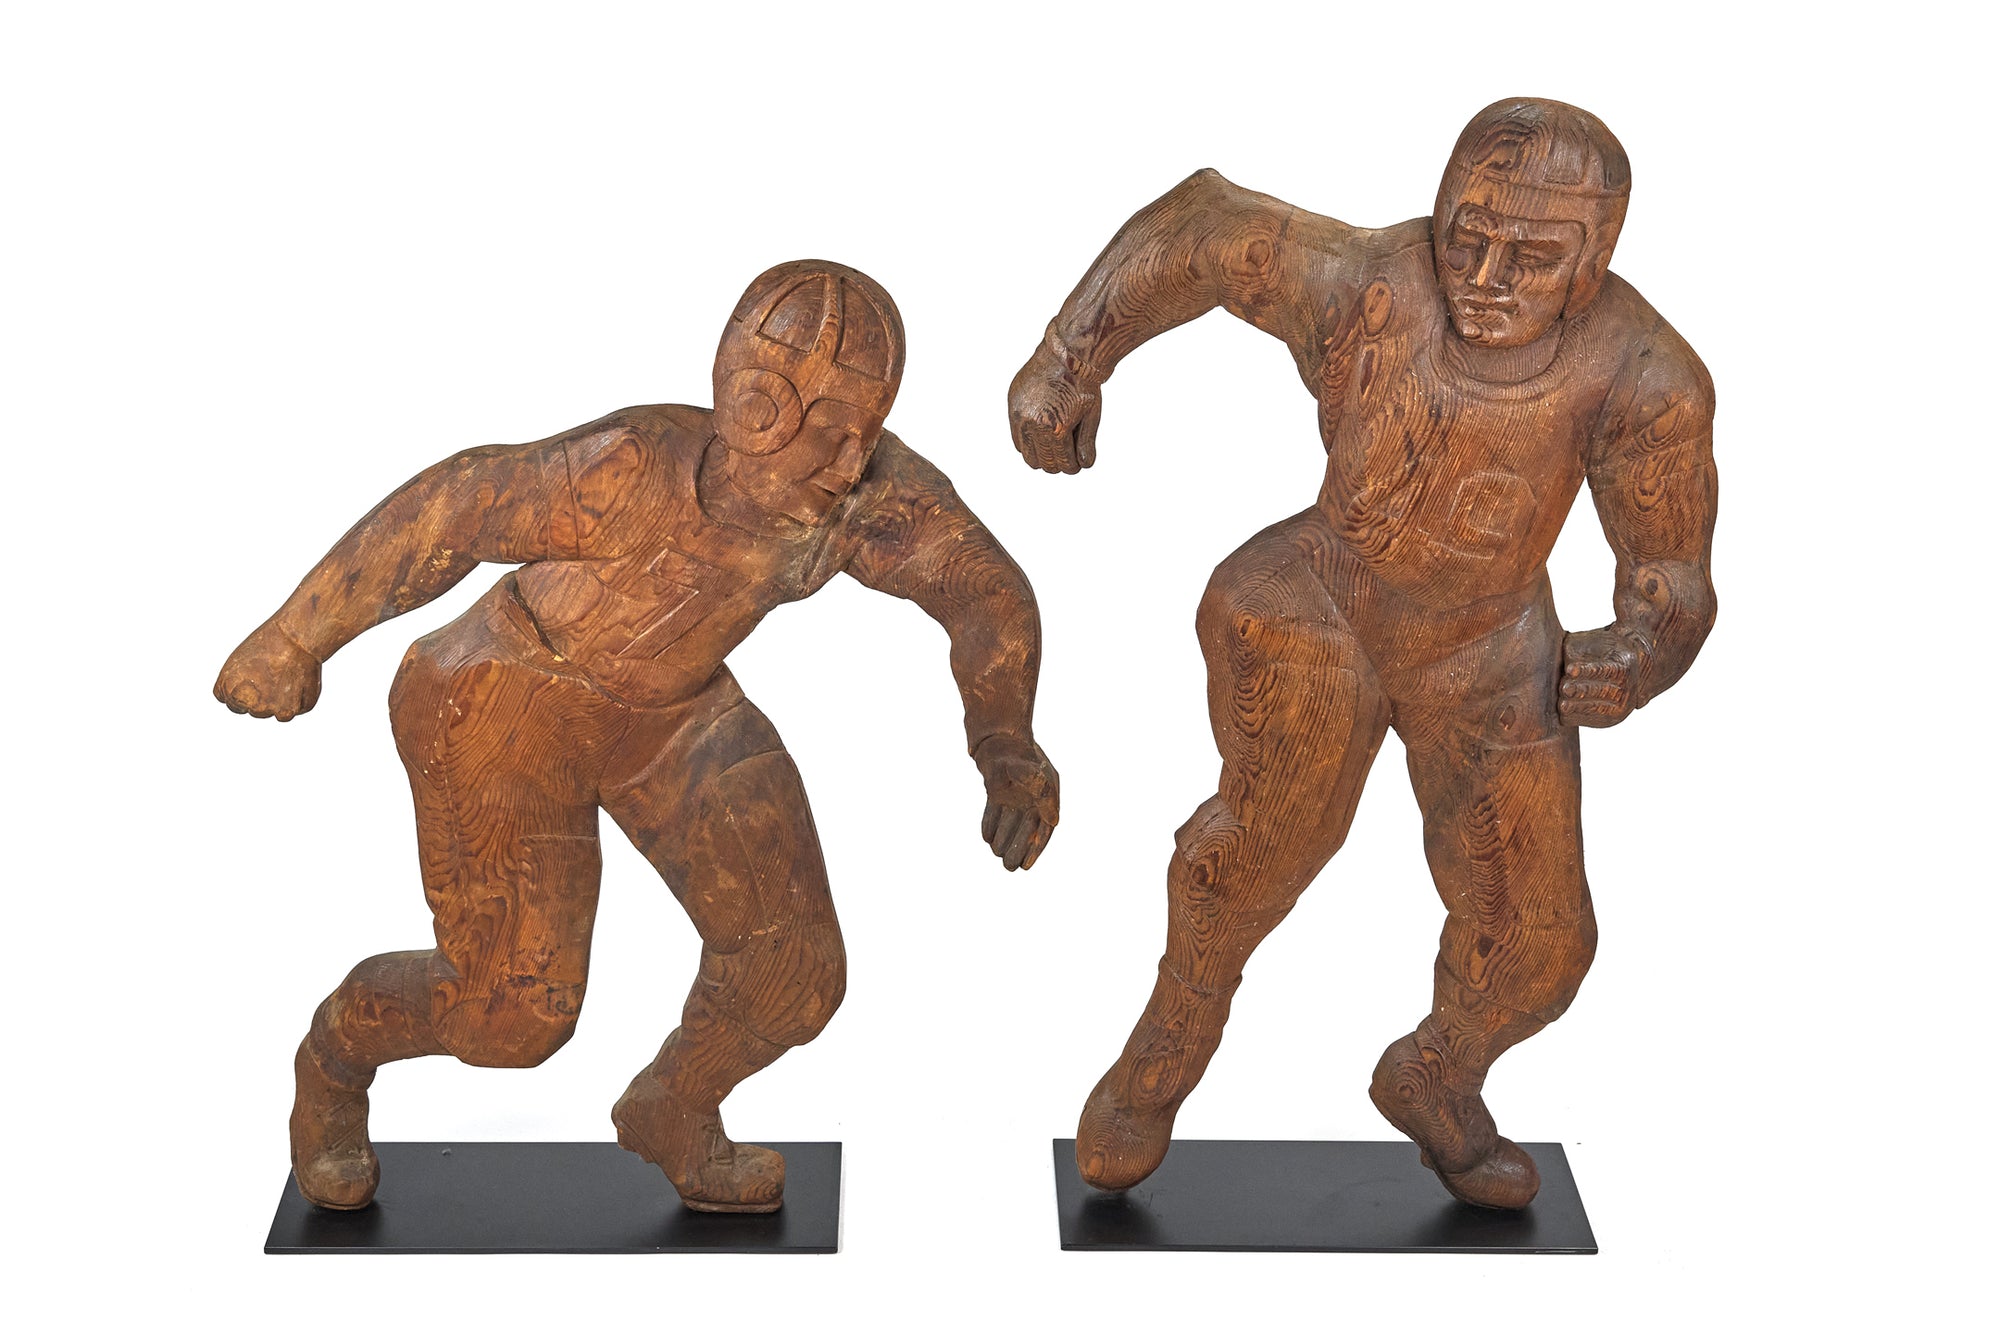 Hand-Carved Wood Football Players